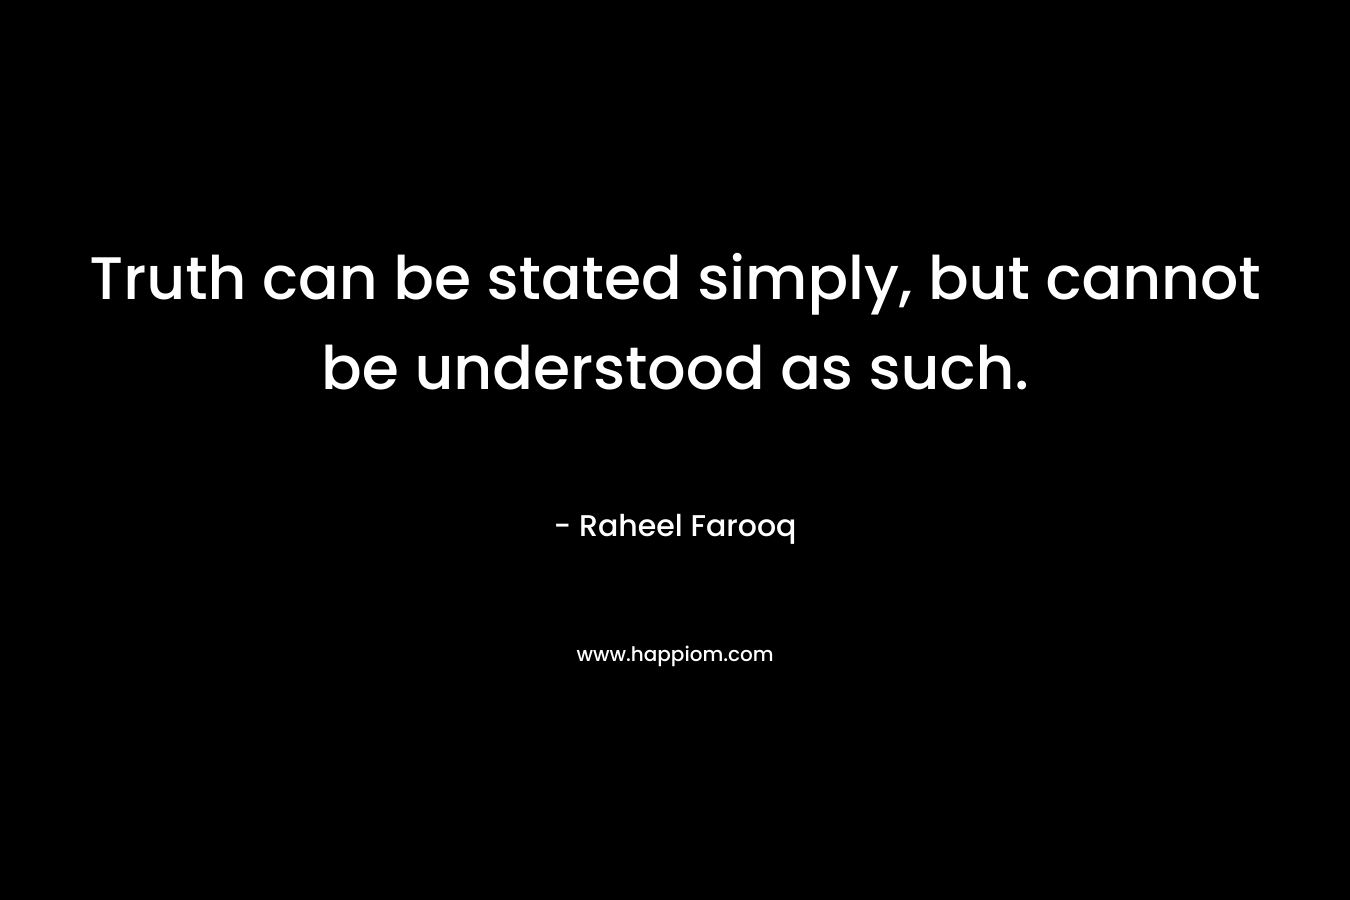 Truth can be stated simply, but cannot be understood as such. – Raheel Farooq